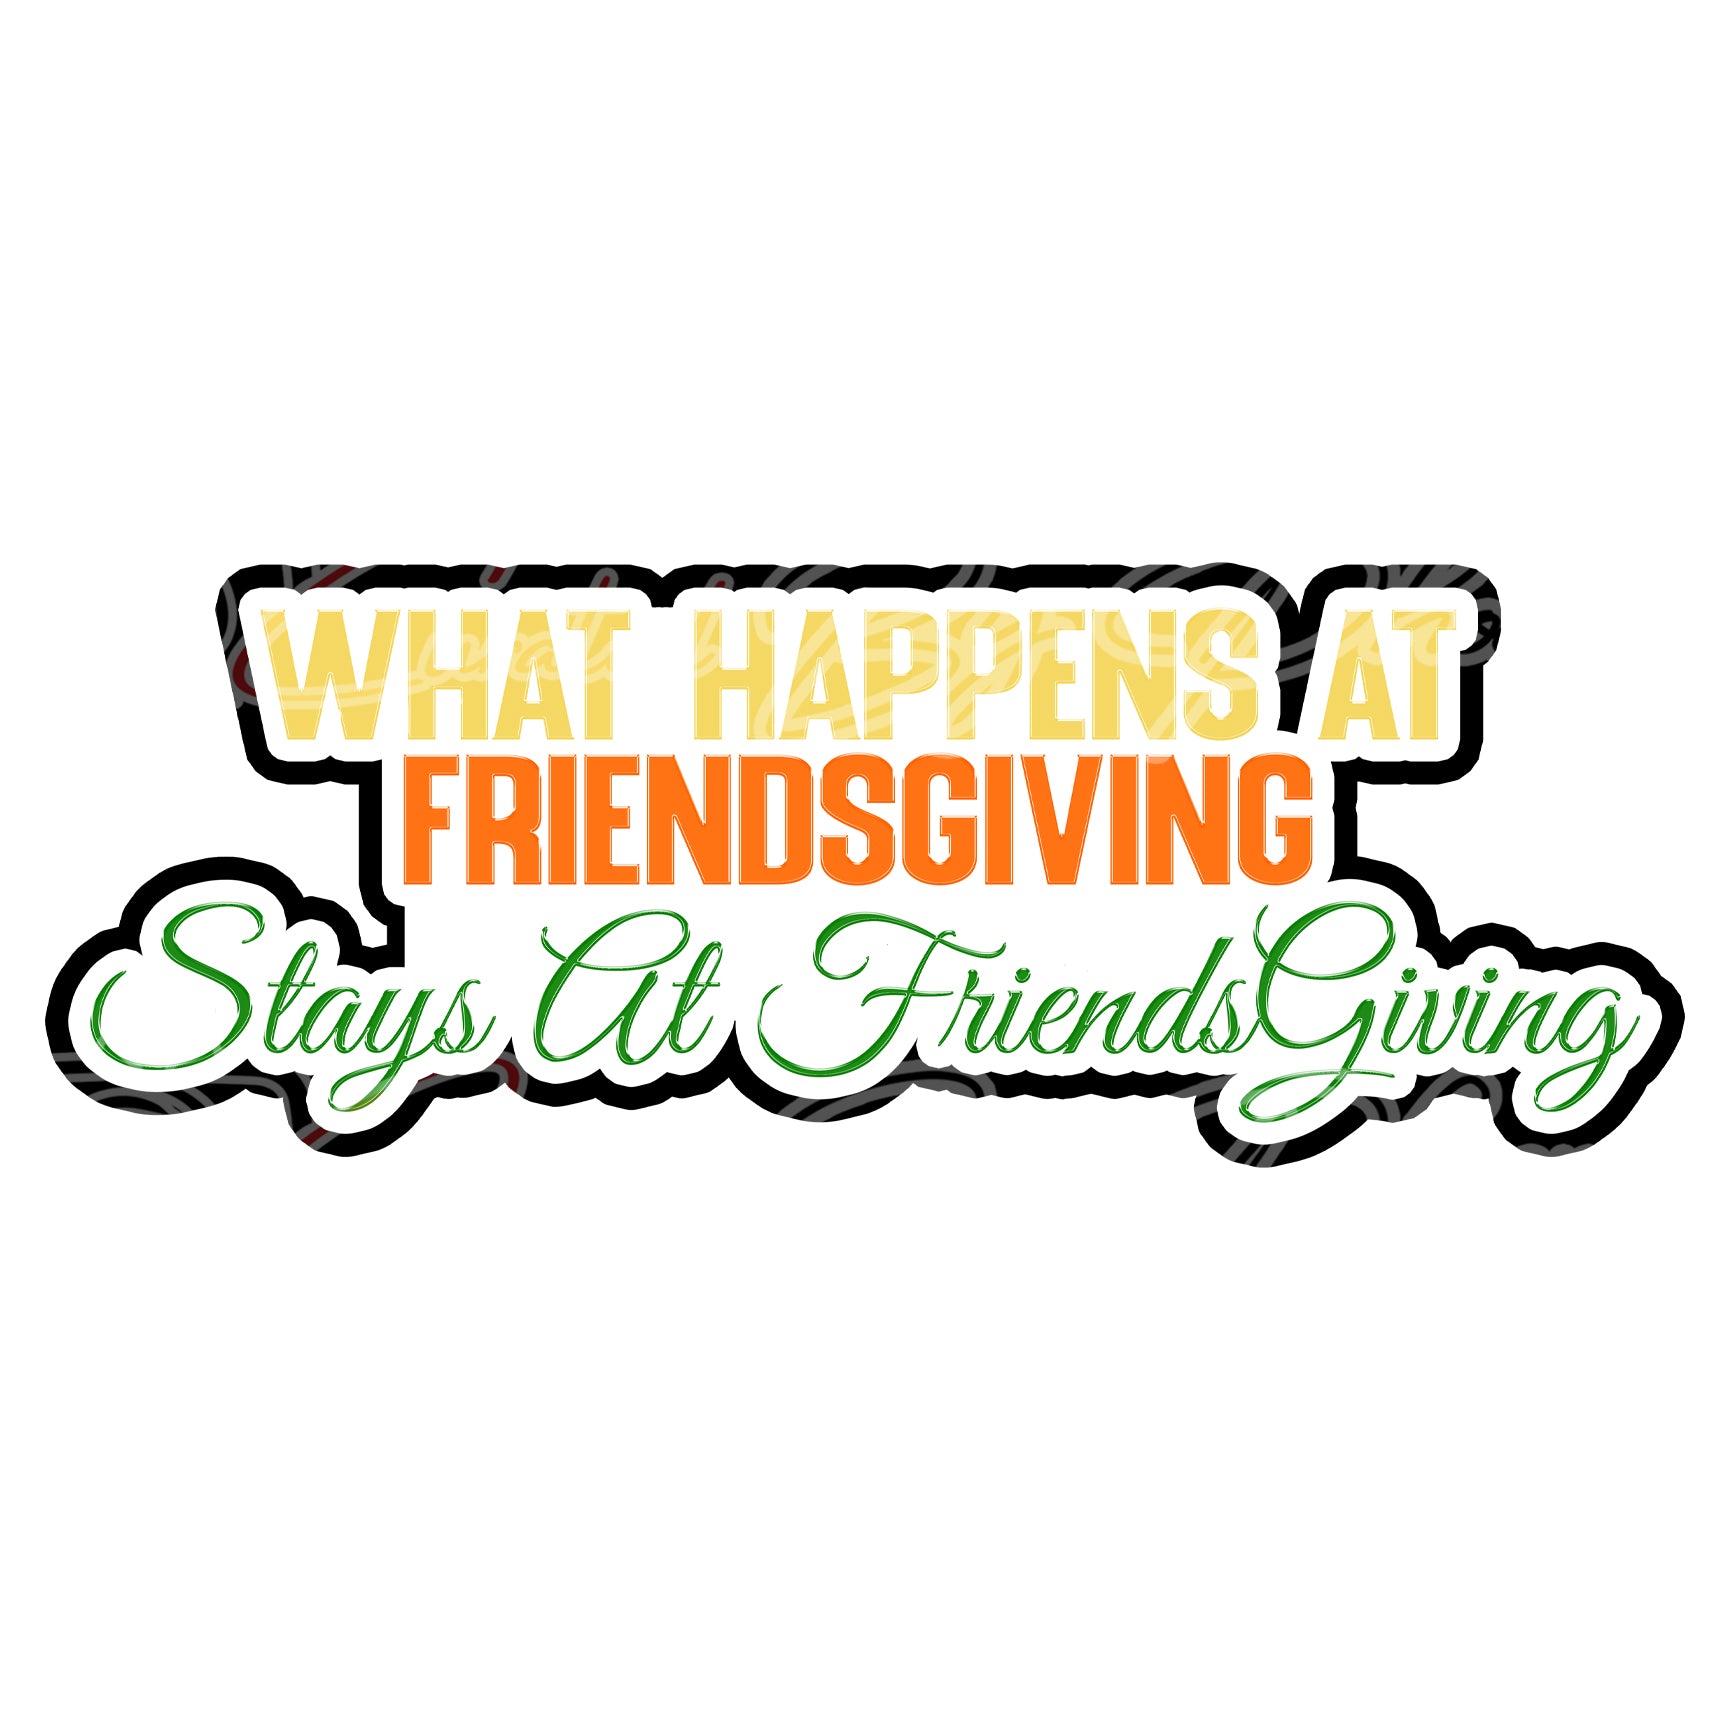  What Happens At Friendsgiving Stays At Friendsgiving  prop-Thanksgiving day prop-thanksgiving day photo booth prop-photo booth props- props-photo booth props-custom props- custom prop signs-props -Curated by Phoenix